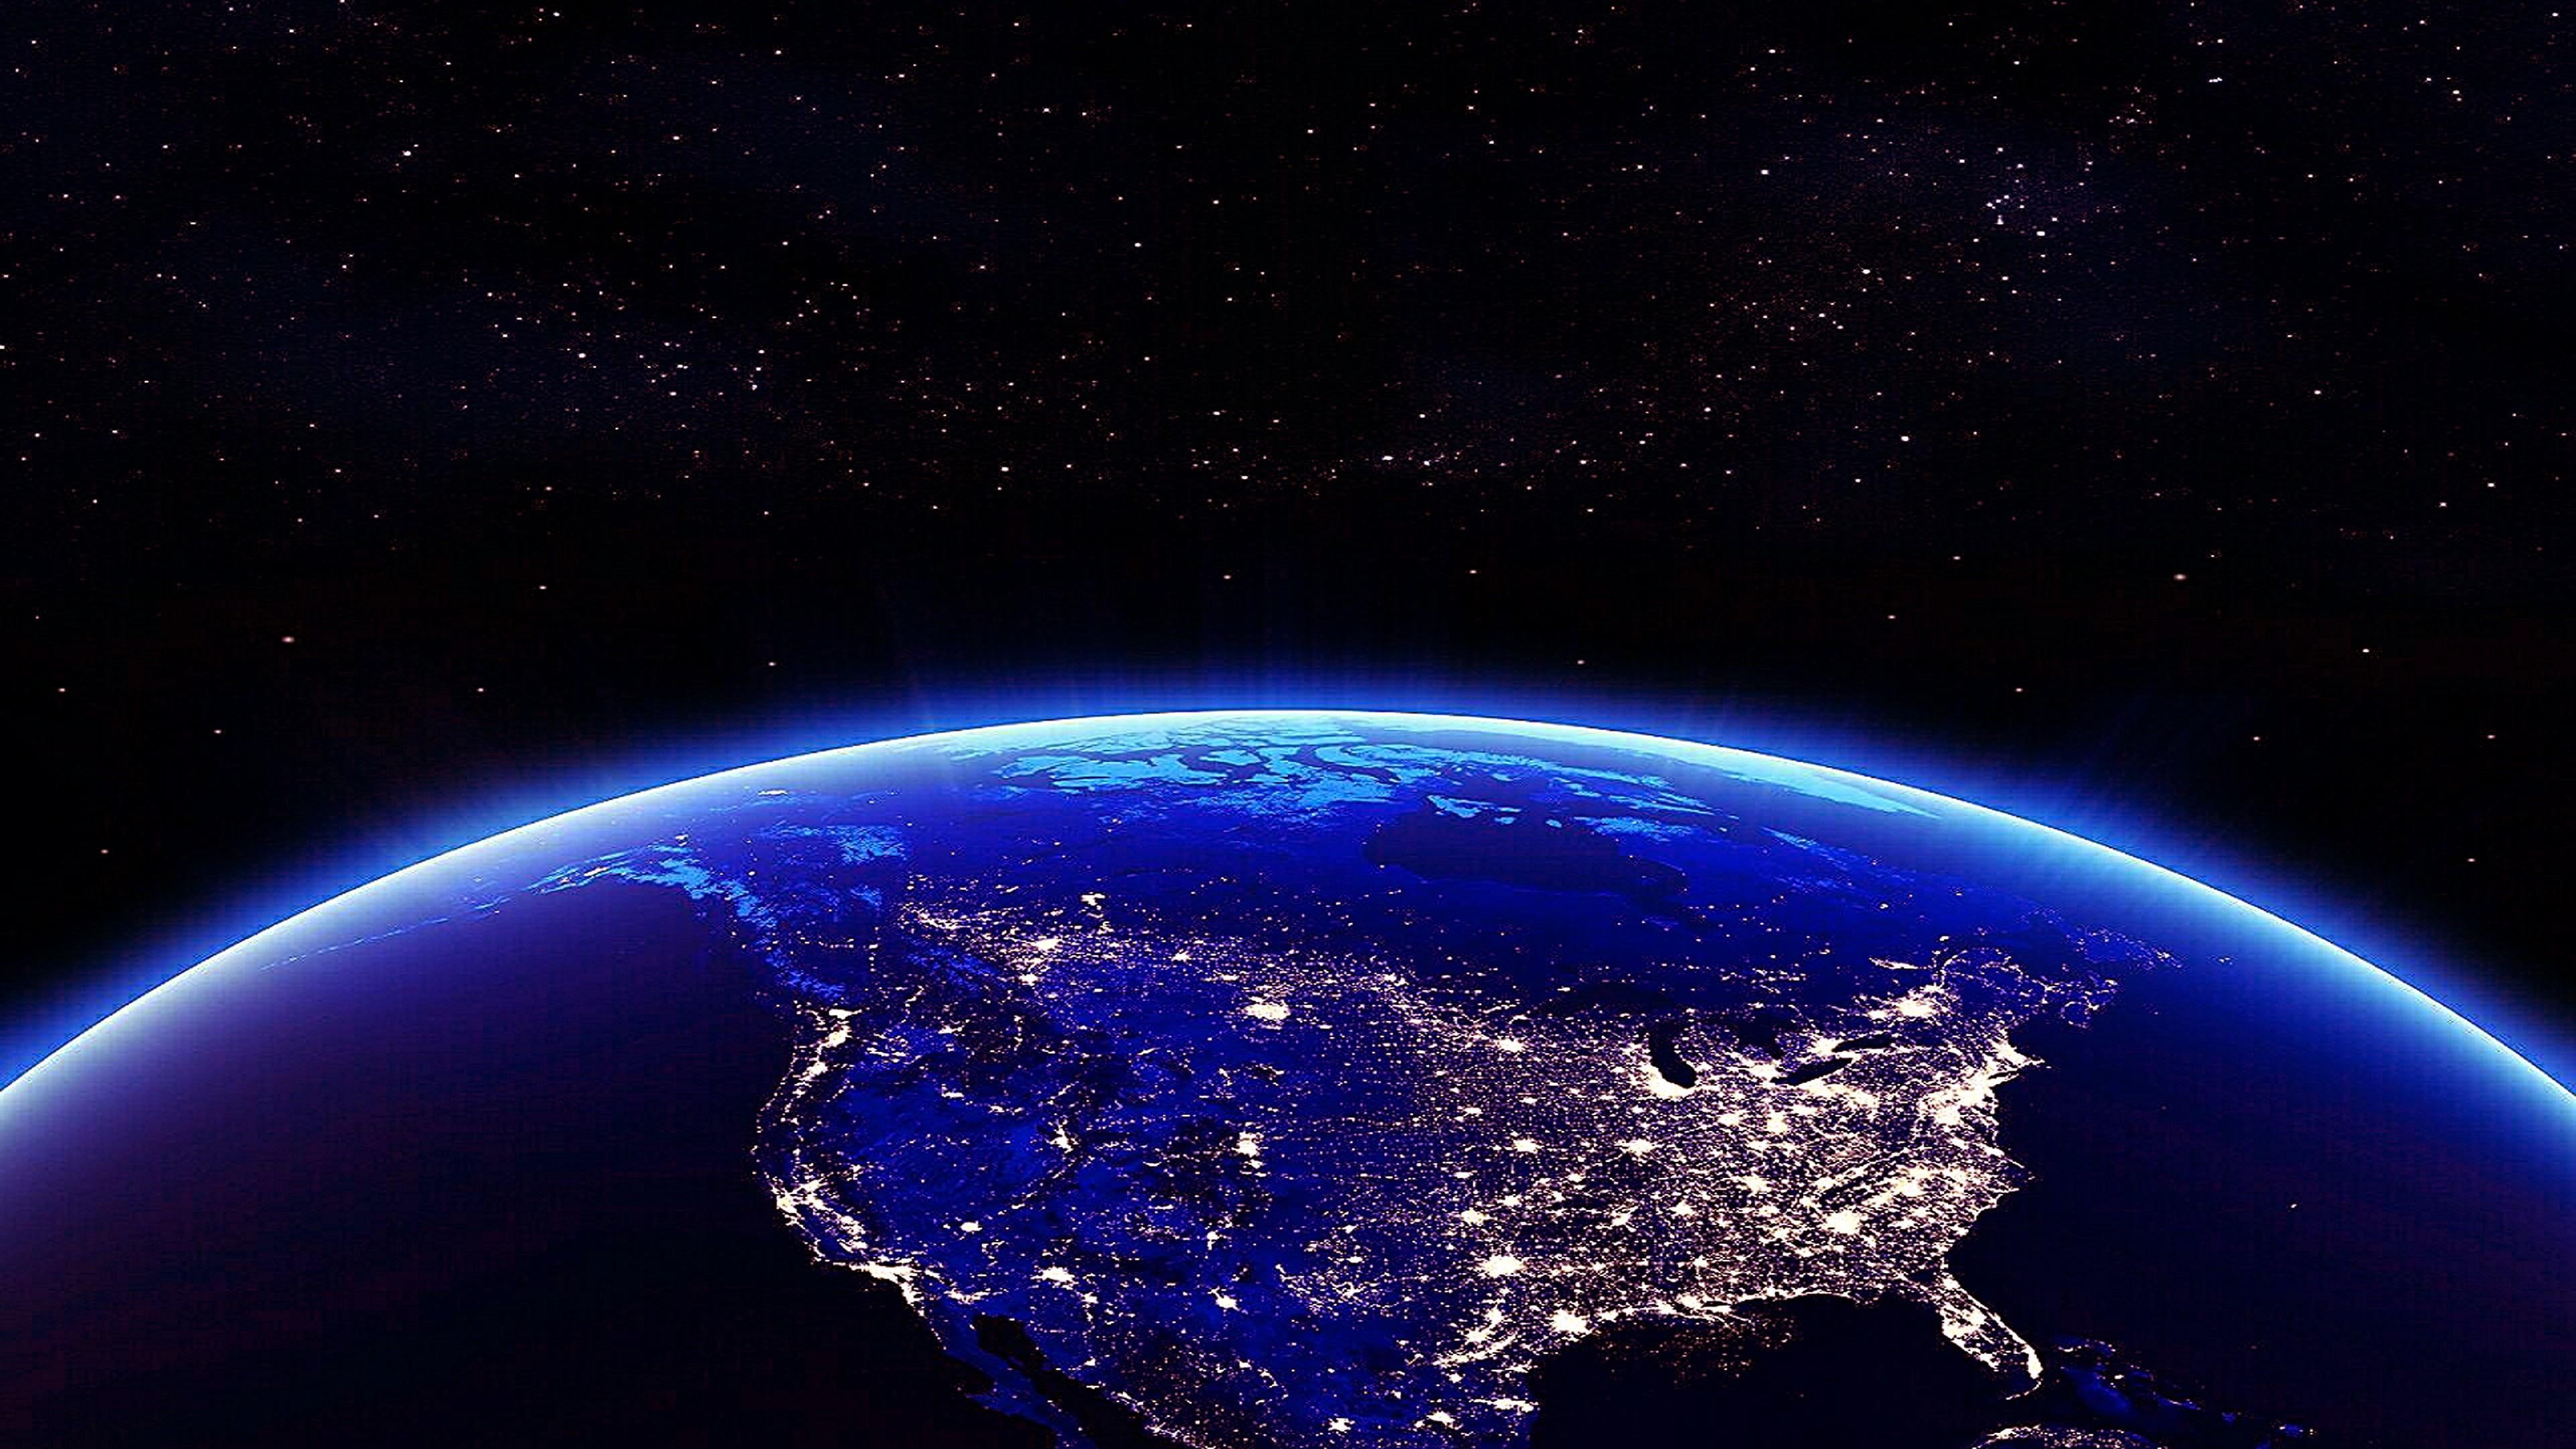 Earth North America In The Night View From Space 4k Wallpaper For Mobile Phones Tablet And. Wallpaper earth, 4k wallpaper for mobile, Wallpaper for mobile phones